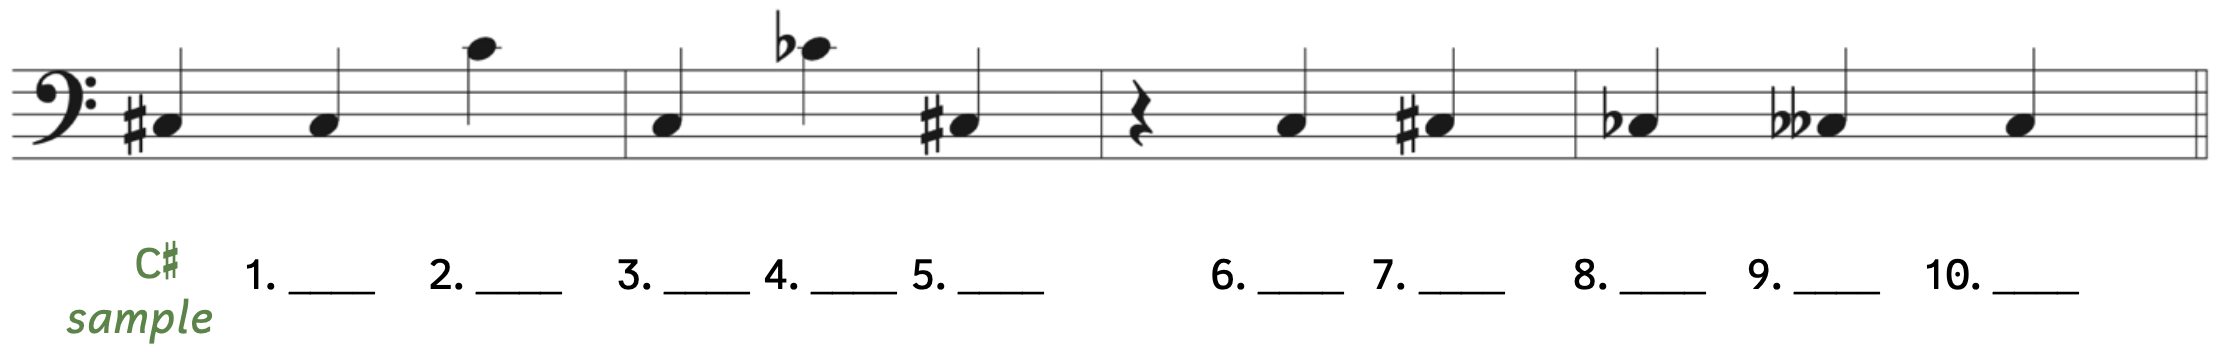 Exercise to identify pitches with accidentals on a staff. Pitches are in the bass clef. The sample is in the second space with a sharp. The answer is C-sharp3. Number 1 is in the second space. Number 2 is on the first ledger line above the staff. There is a bar line. Number 3 is in the second space. Number 4 is on the first ledger line above the staff with a flat. Number 5 is in the second space with a sharp. There is a bar line. Number 6 is in the second space. Number 7 is in the second space with a sharp. There is a bar line. Number 8 is in the second space with a flat. Number 9 is in the second space with a double flat. Number 10 is in the second space.